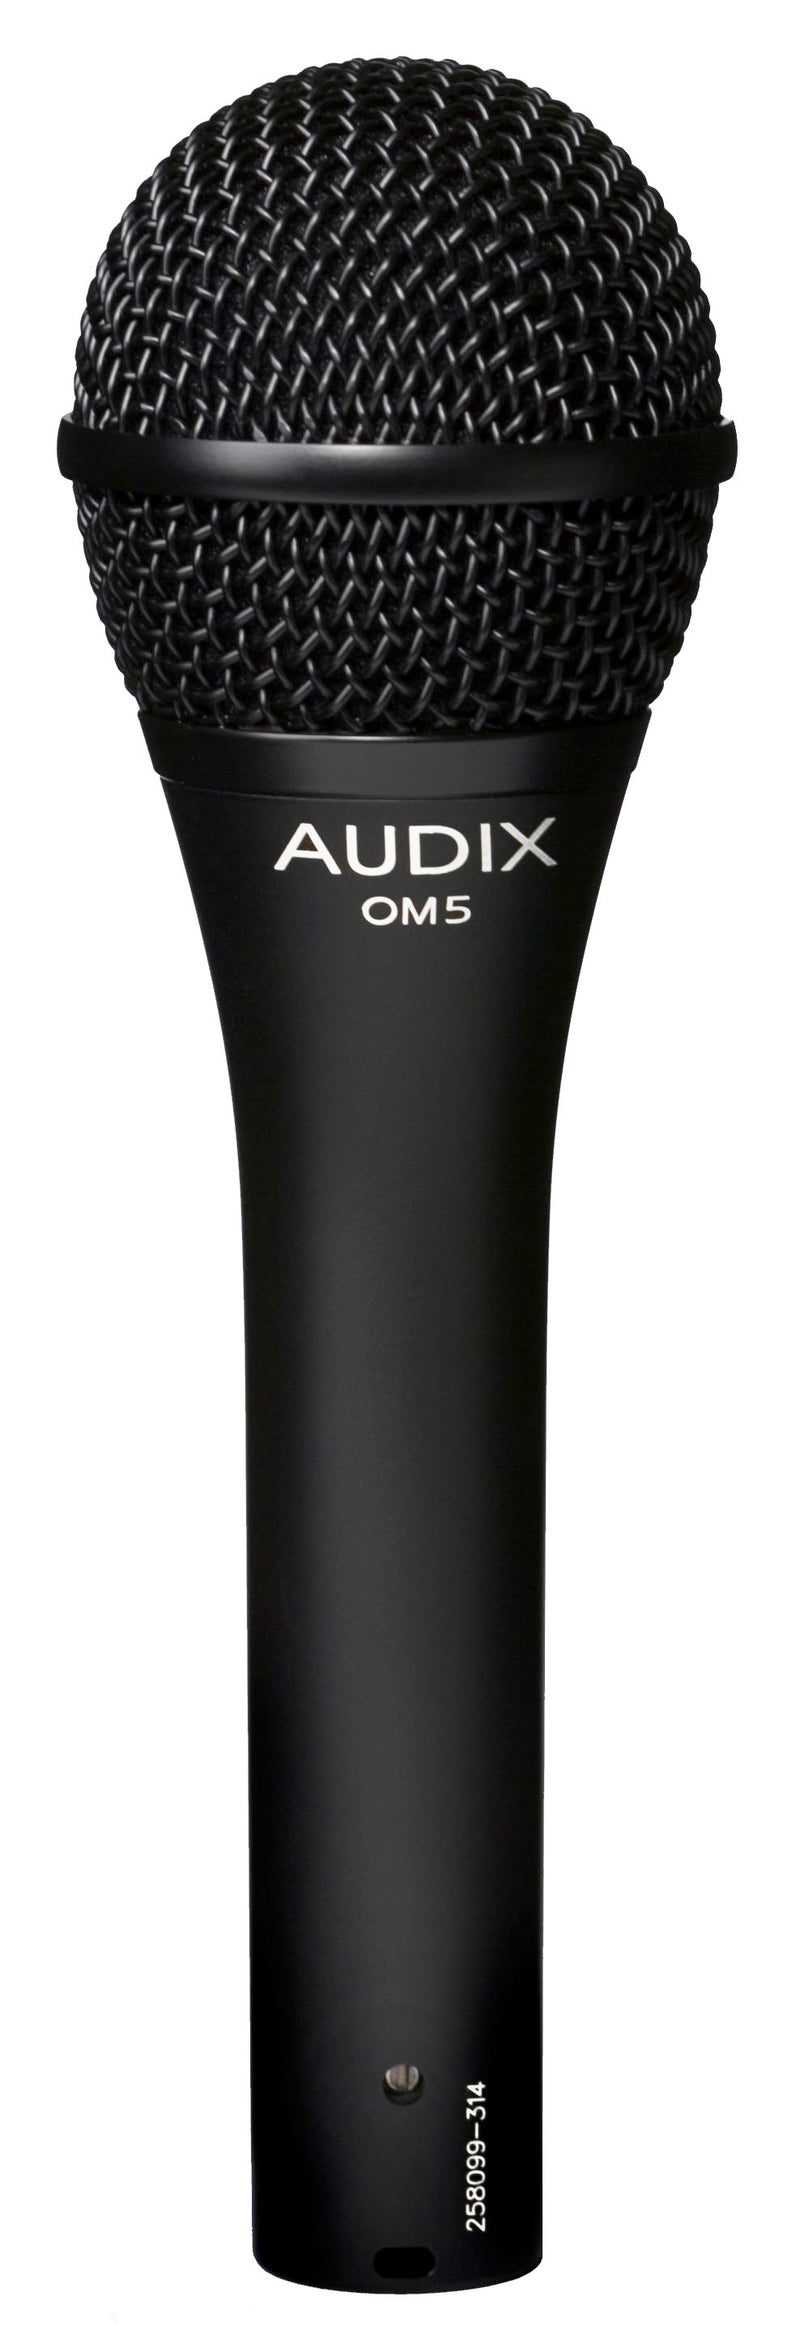 🇺🇸 Audix OM5 Dynamic Vocal Microphone Concert Level, Professional Vocal Microphone